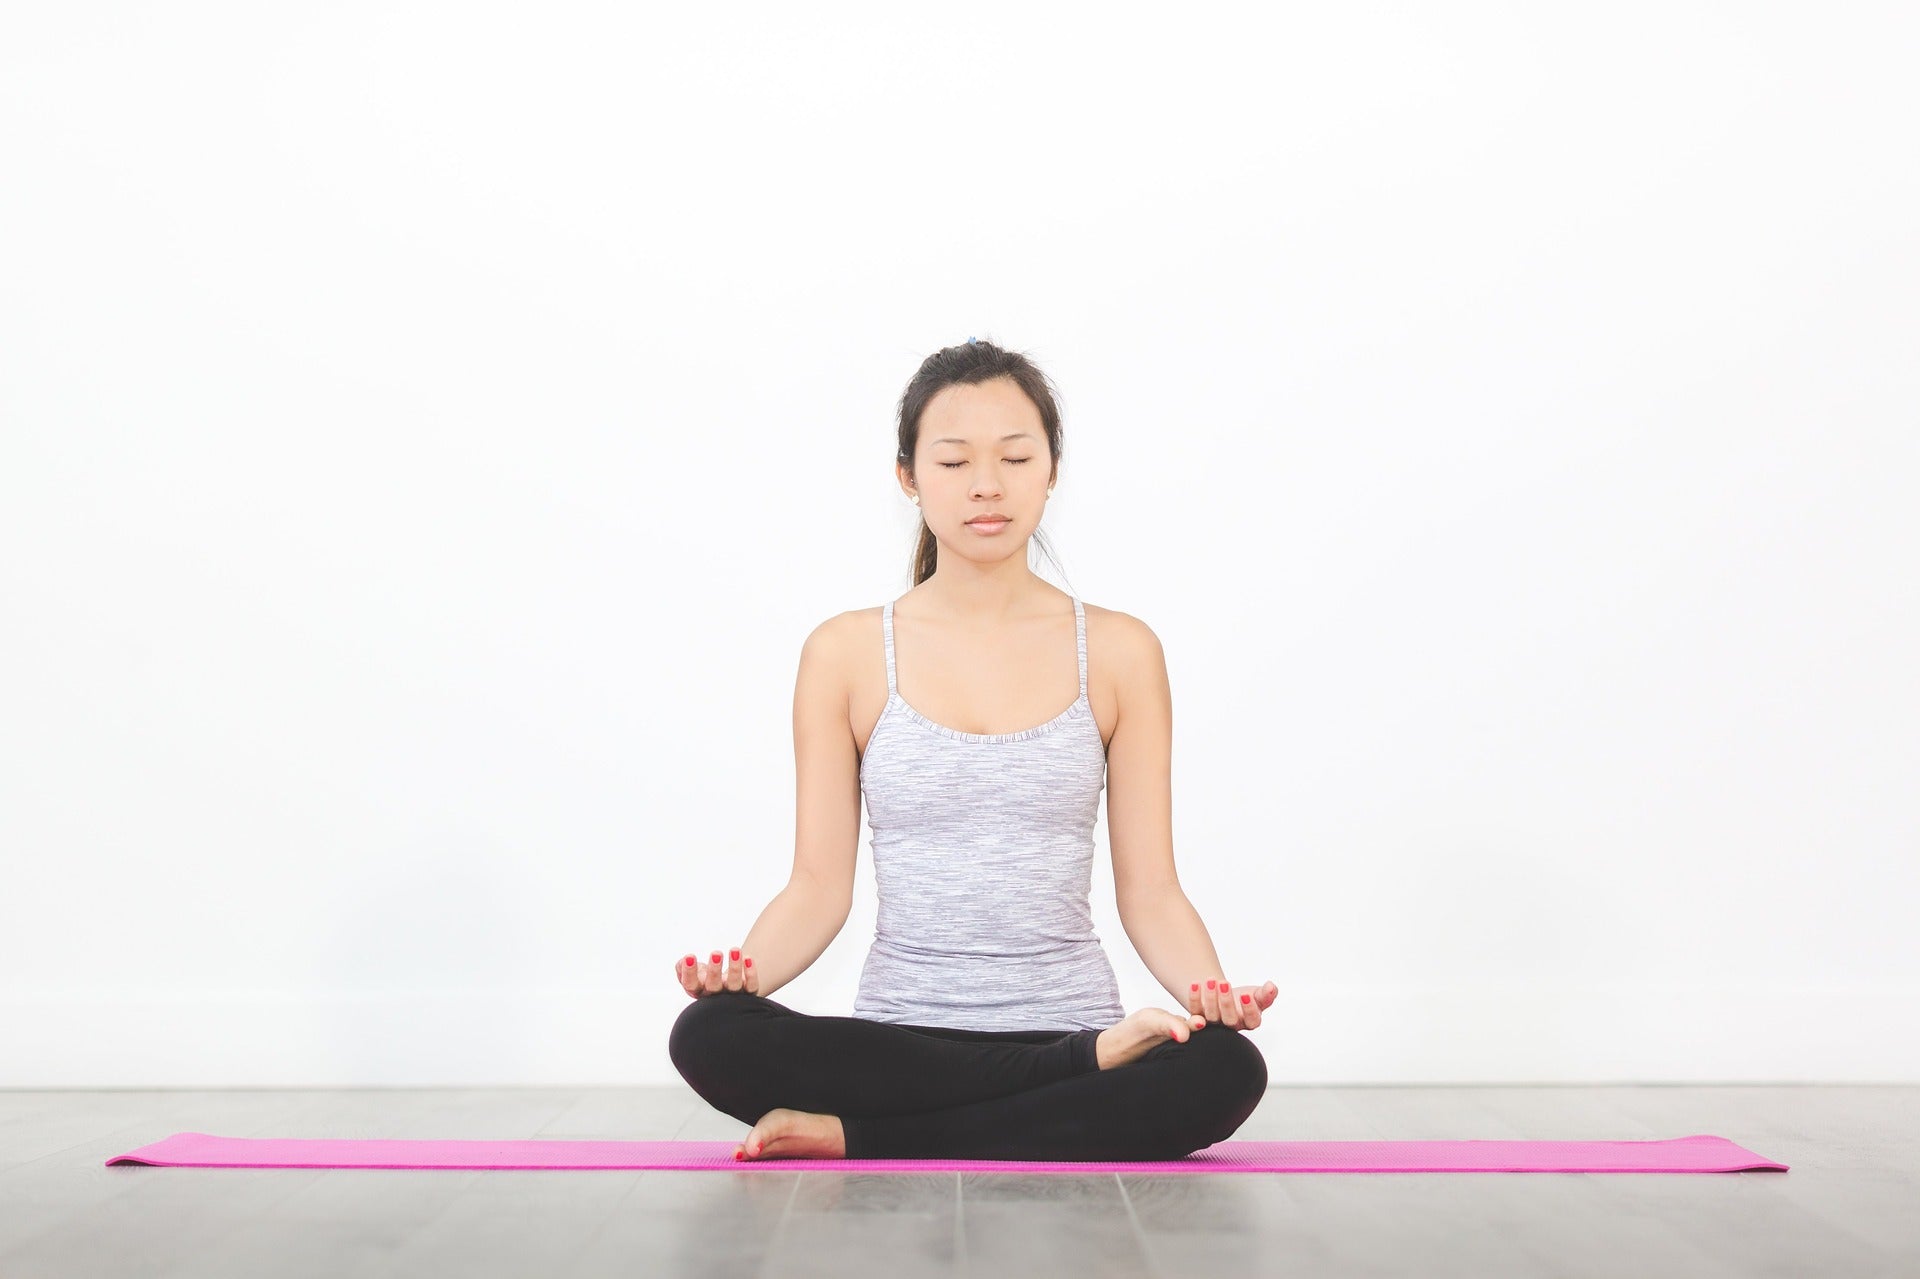 Meditation and breathing techniques can help reduce the anxiety and stress related to the coronavirus